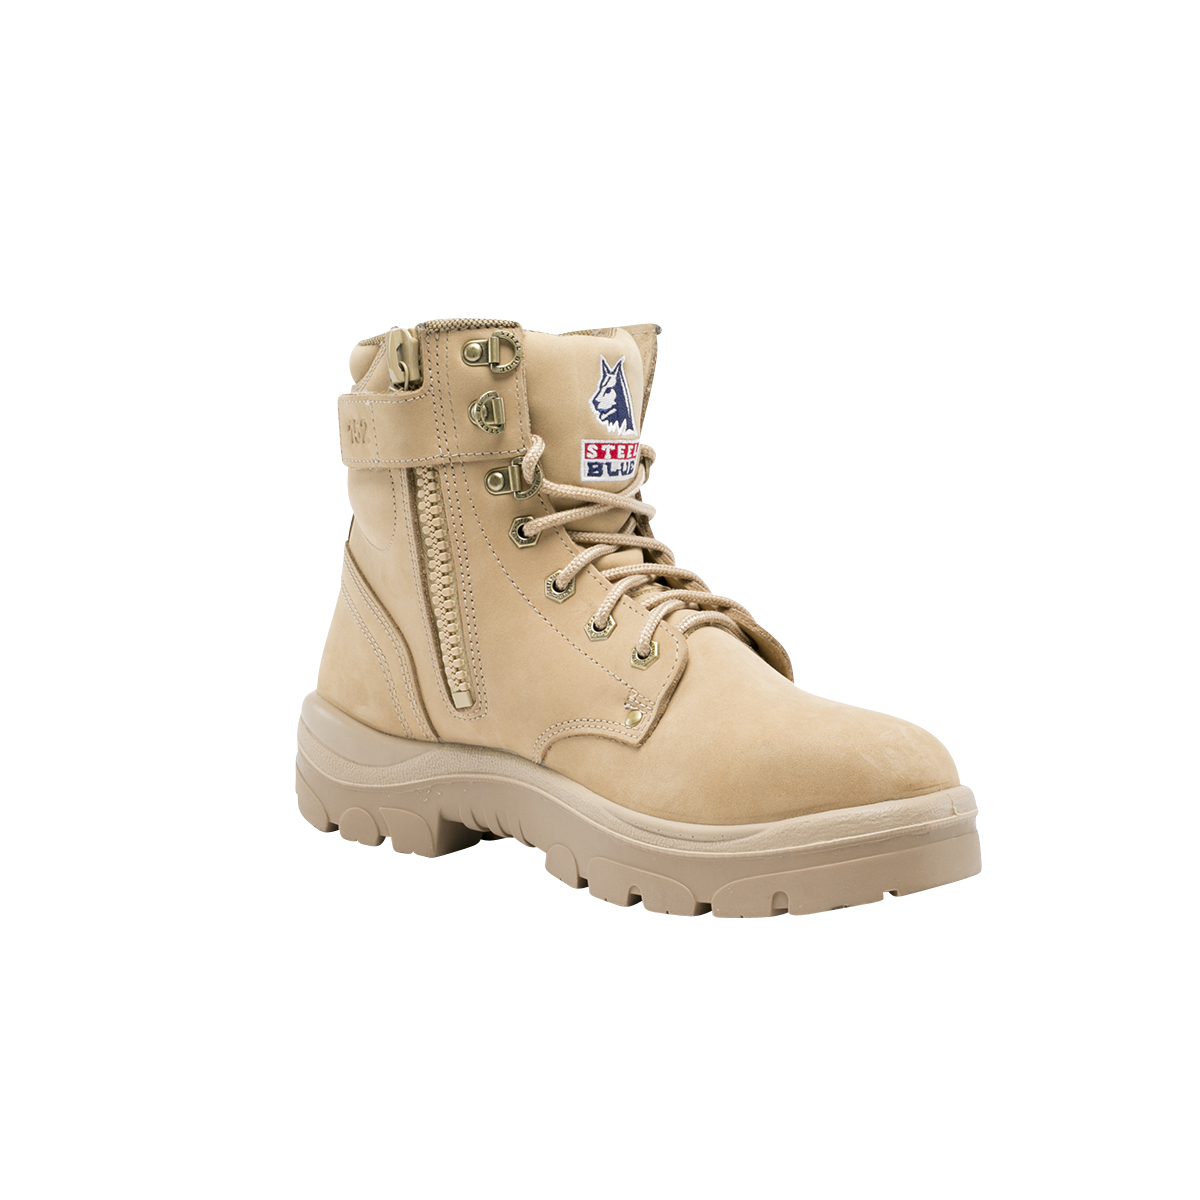 SAFETY BOOT ARGYLE LACE & ZIP S10 - ANKLE SAND